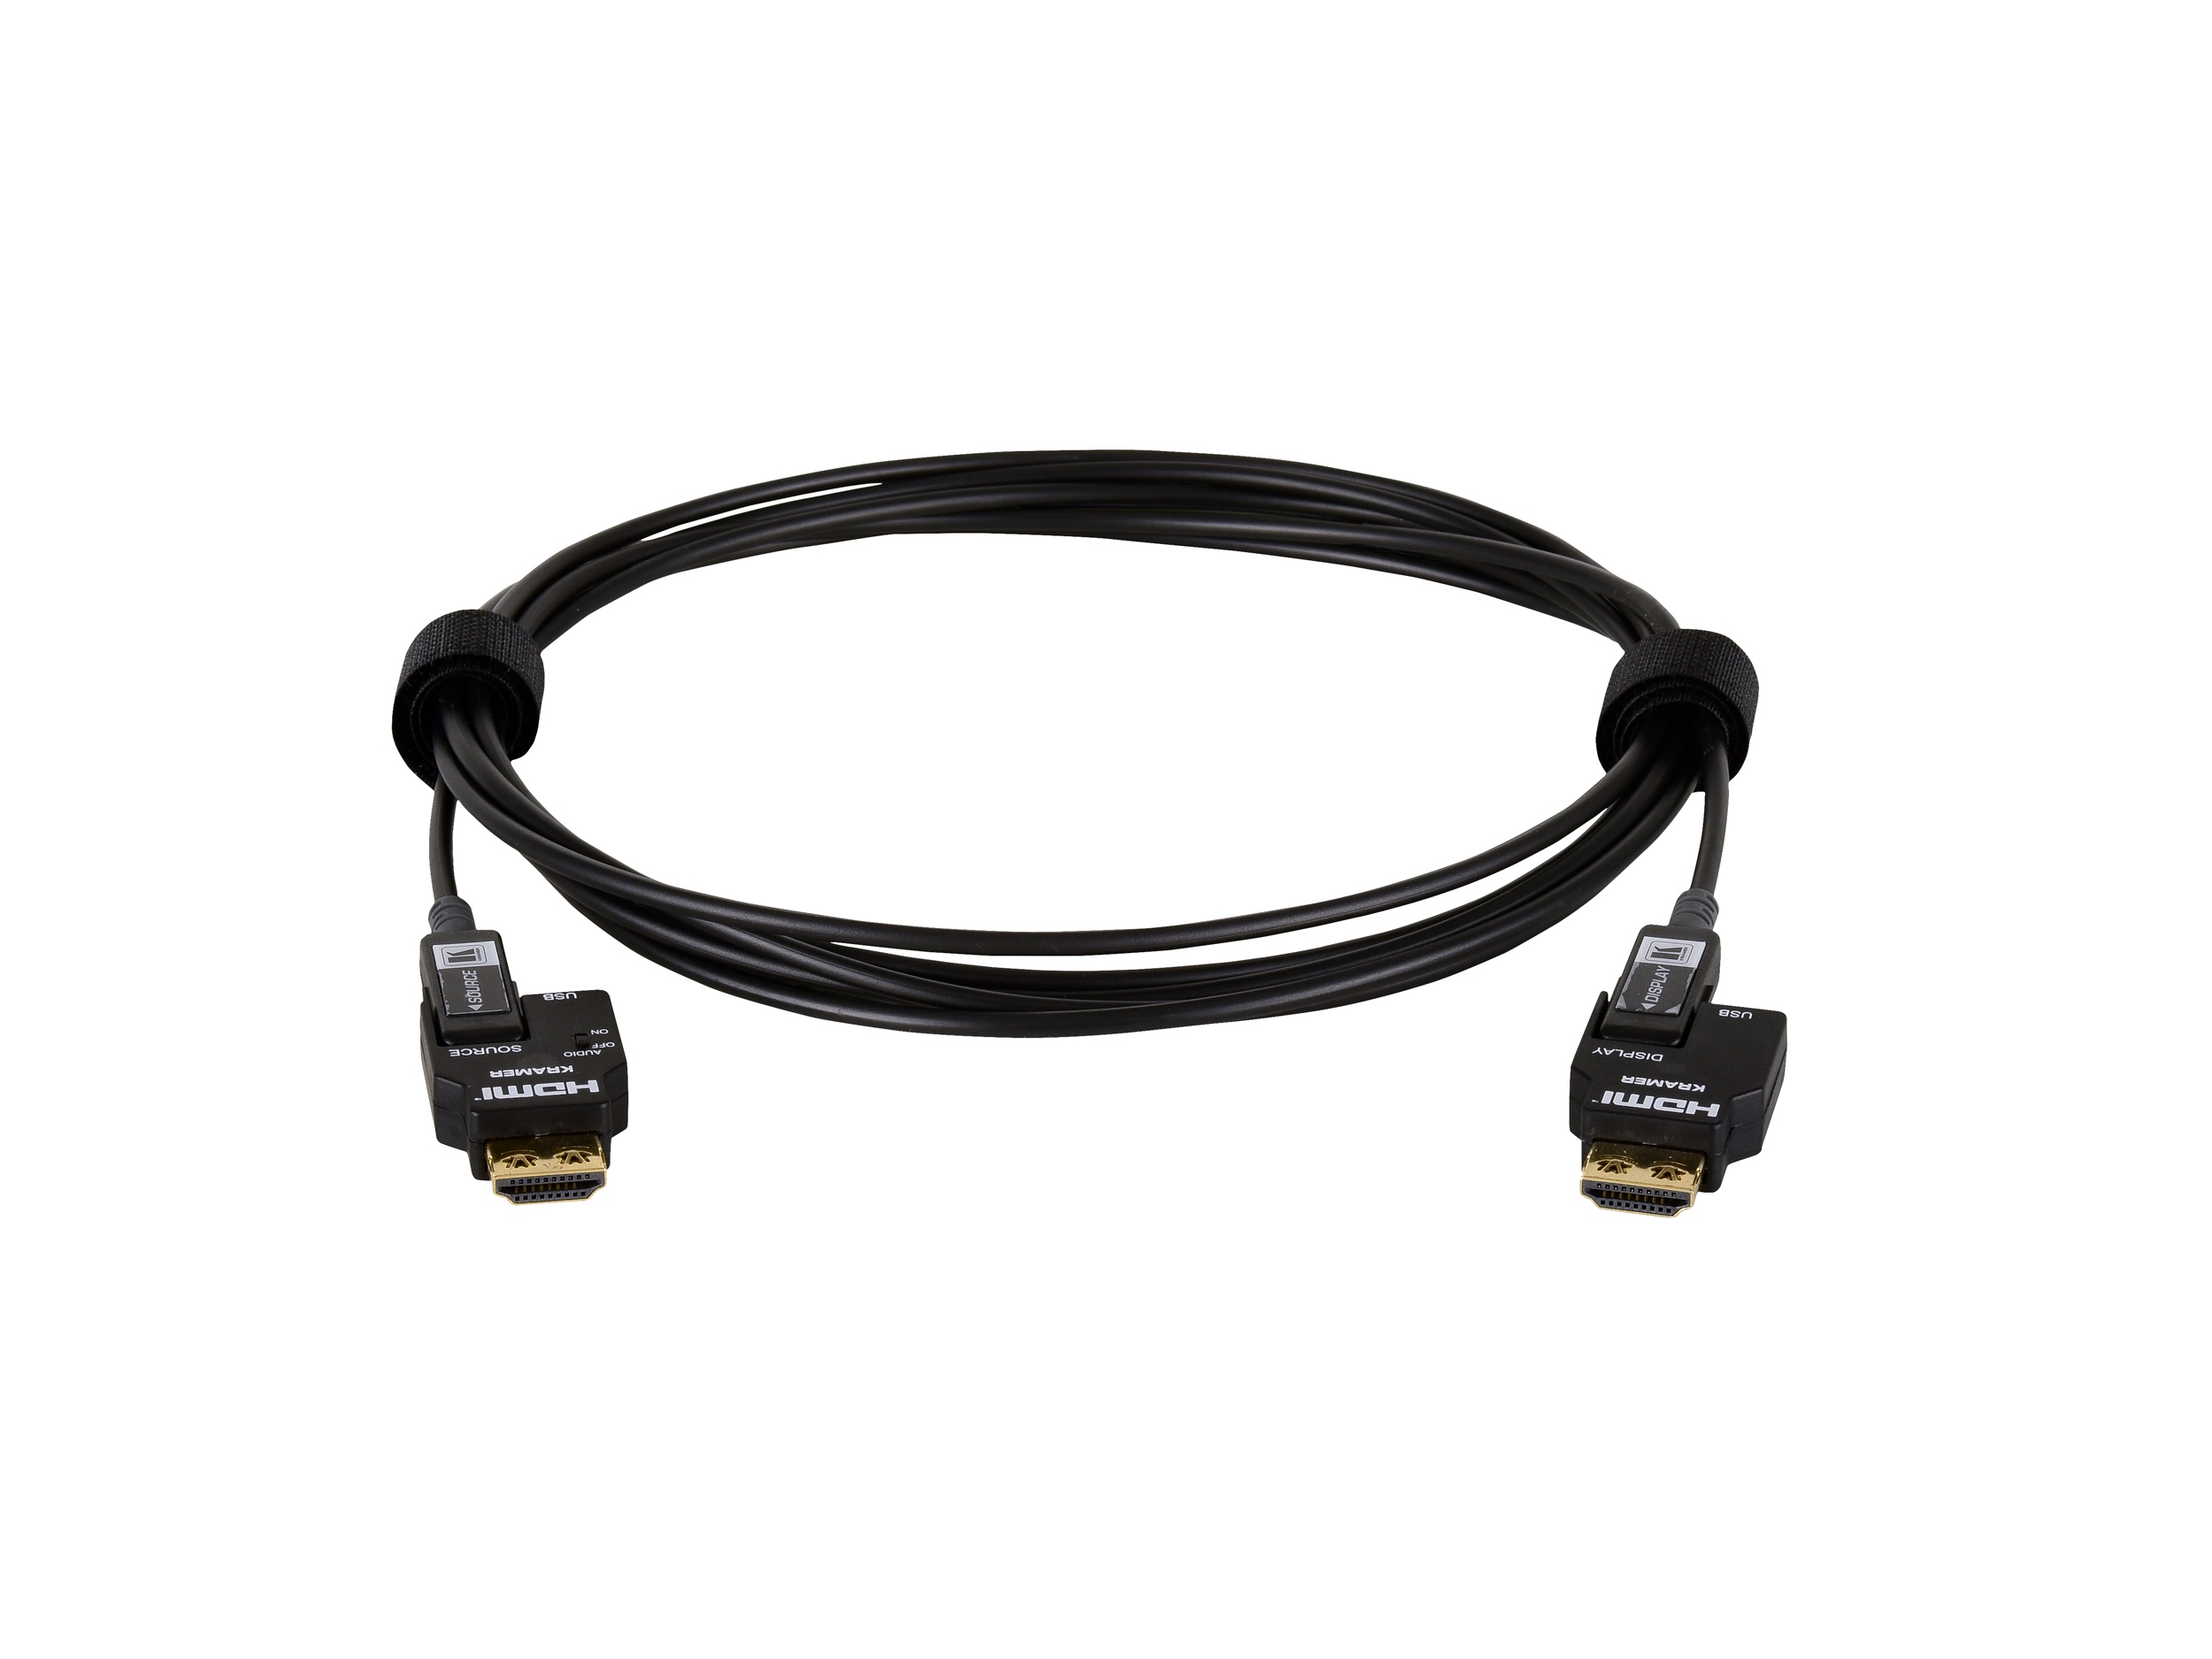 CRS-FIBERH-S1-131 40m/131ft 4K/60Hz (4x2x0) Secured Unidirectional 4K Pluggable HDMI Cable over Pure Fiber Cable by Kramer